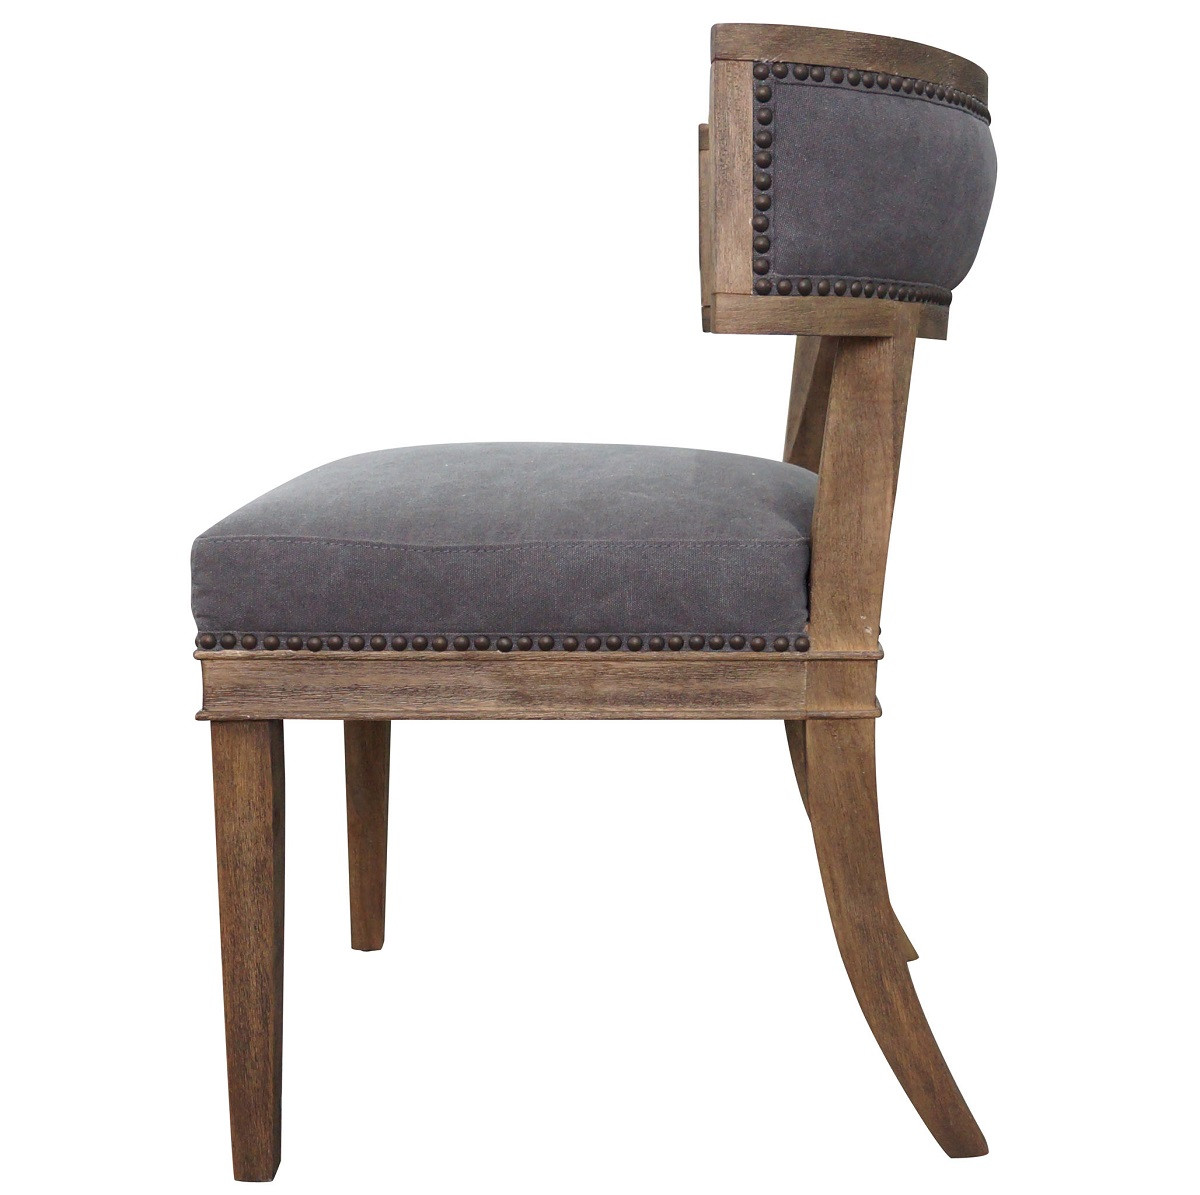 Carter Upholstered Curved Dining Chair Zin Home